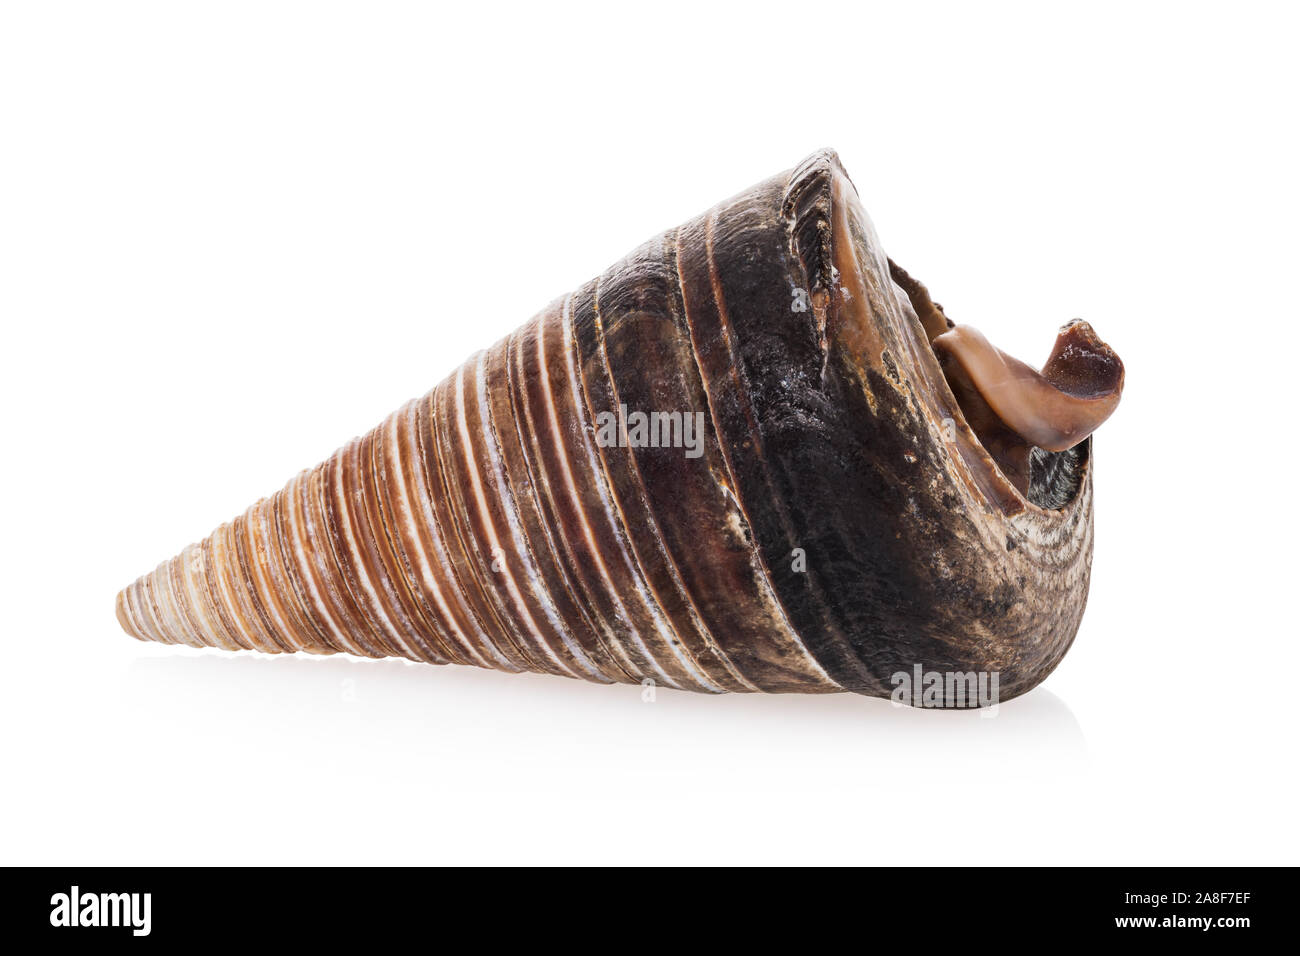 https://c8.alamy.com/comp/2A8F7EF/cone-shaped-seashell-isolated-on-white-background-photo-taken-by-stacking-method-brown-sea-souvenir-2A8F7EF.jpg